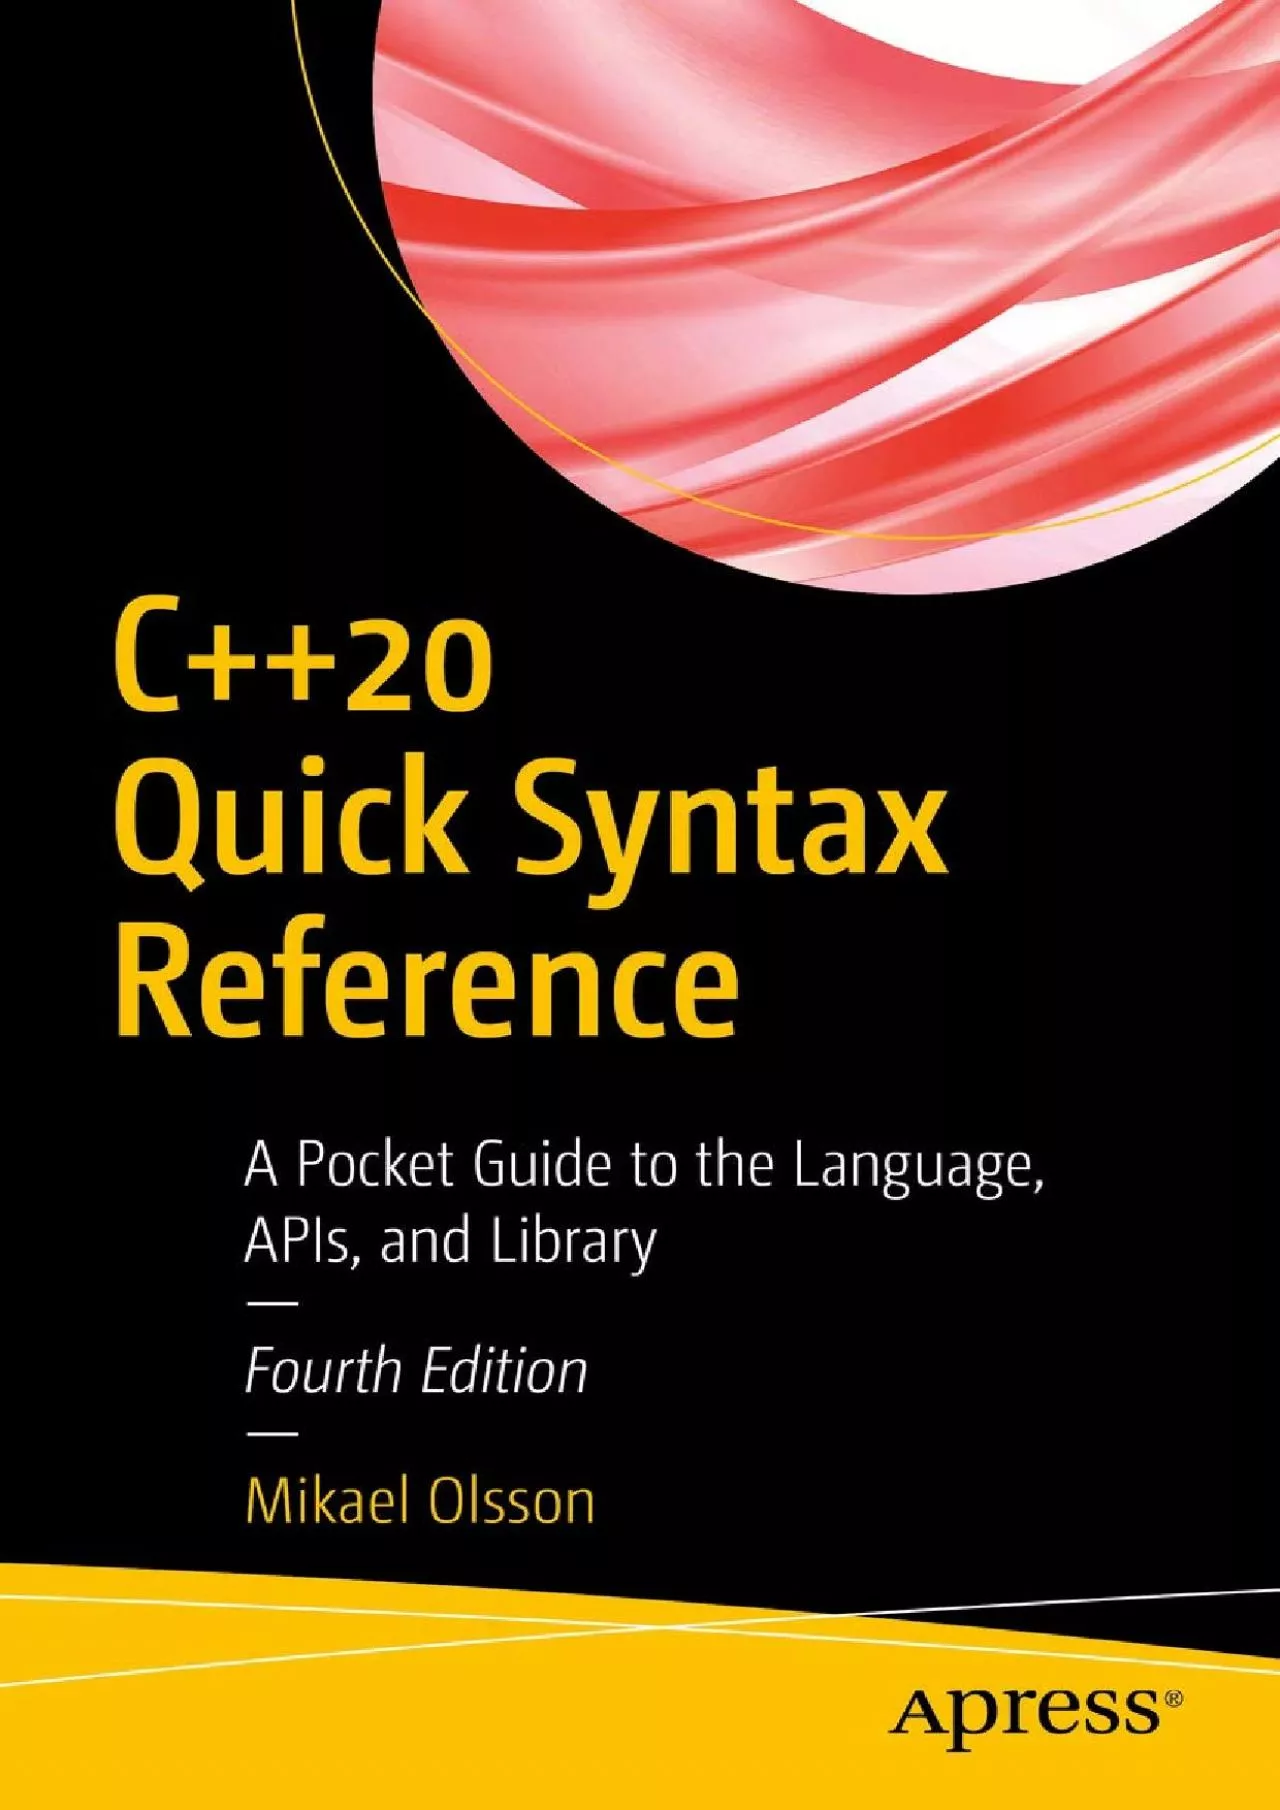 [PDF]-C++20 Quick Syntax Reference: A Pocket Guide to the Language, APIs, and Library